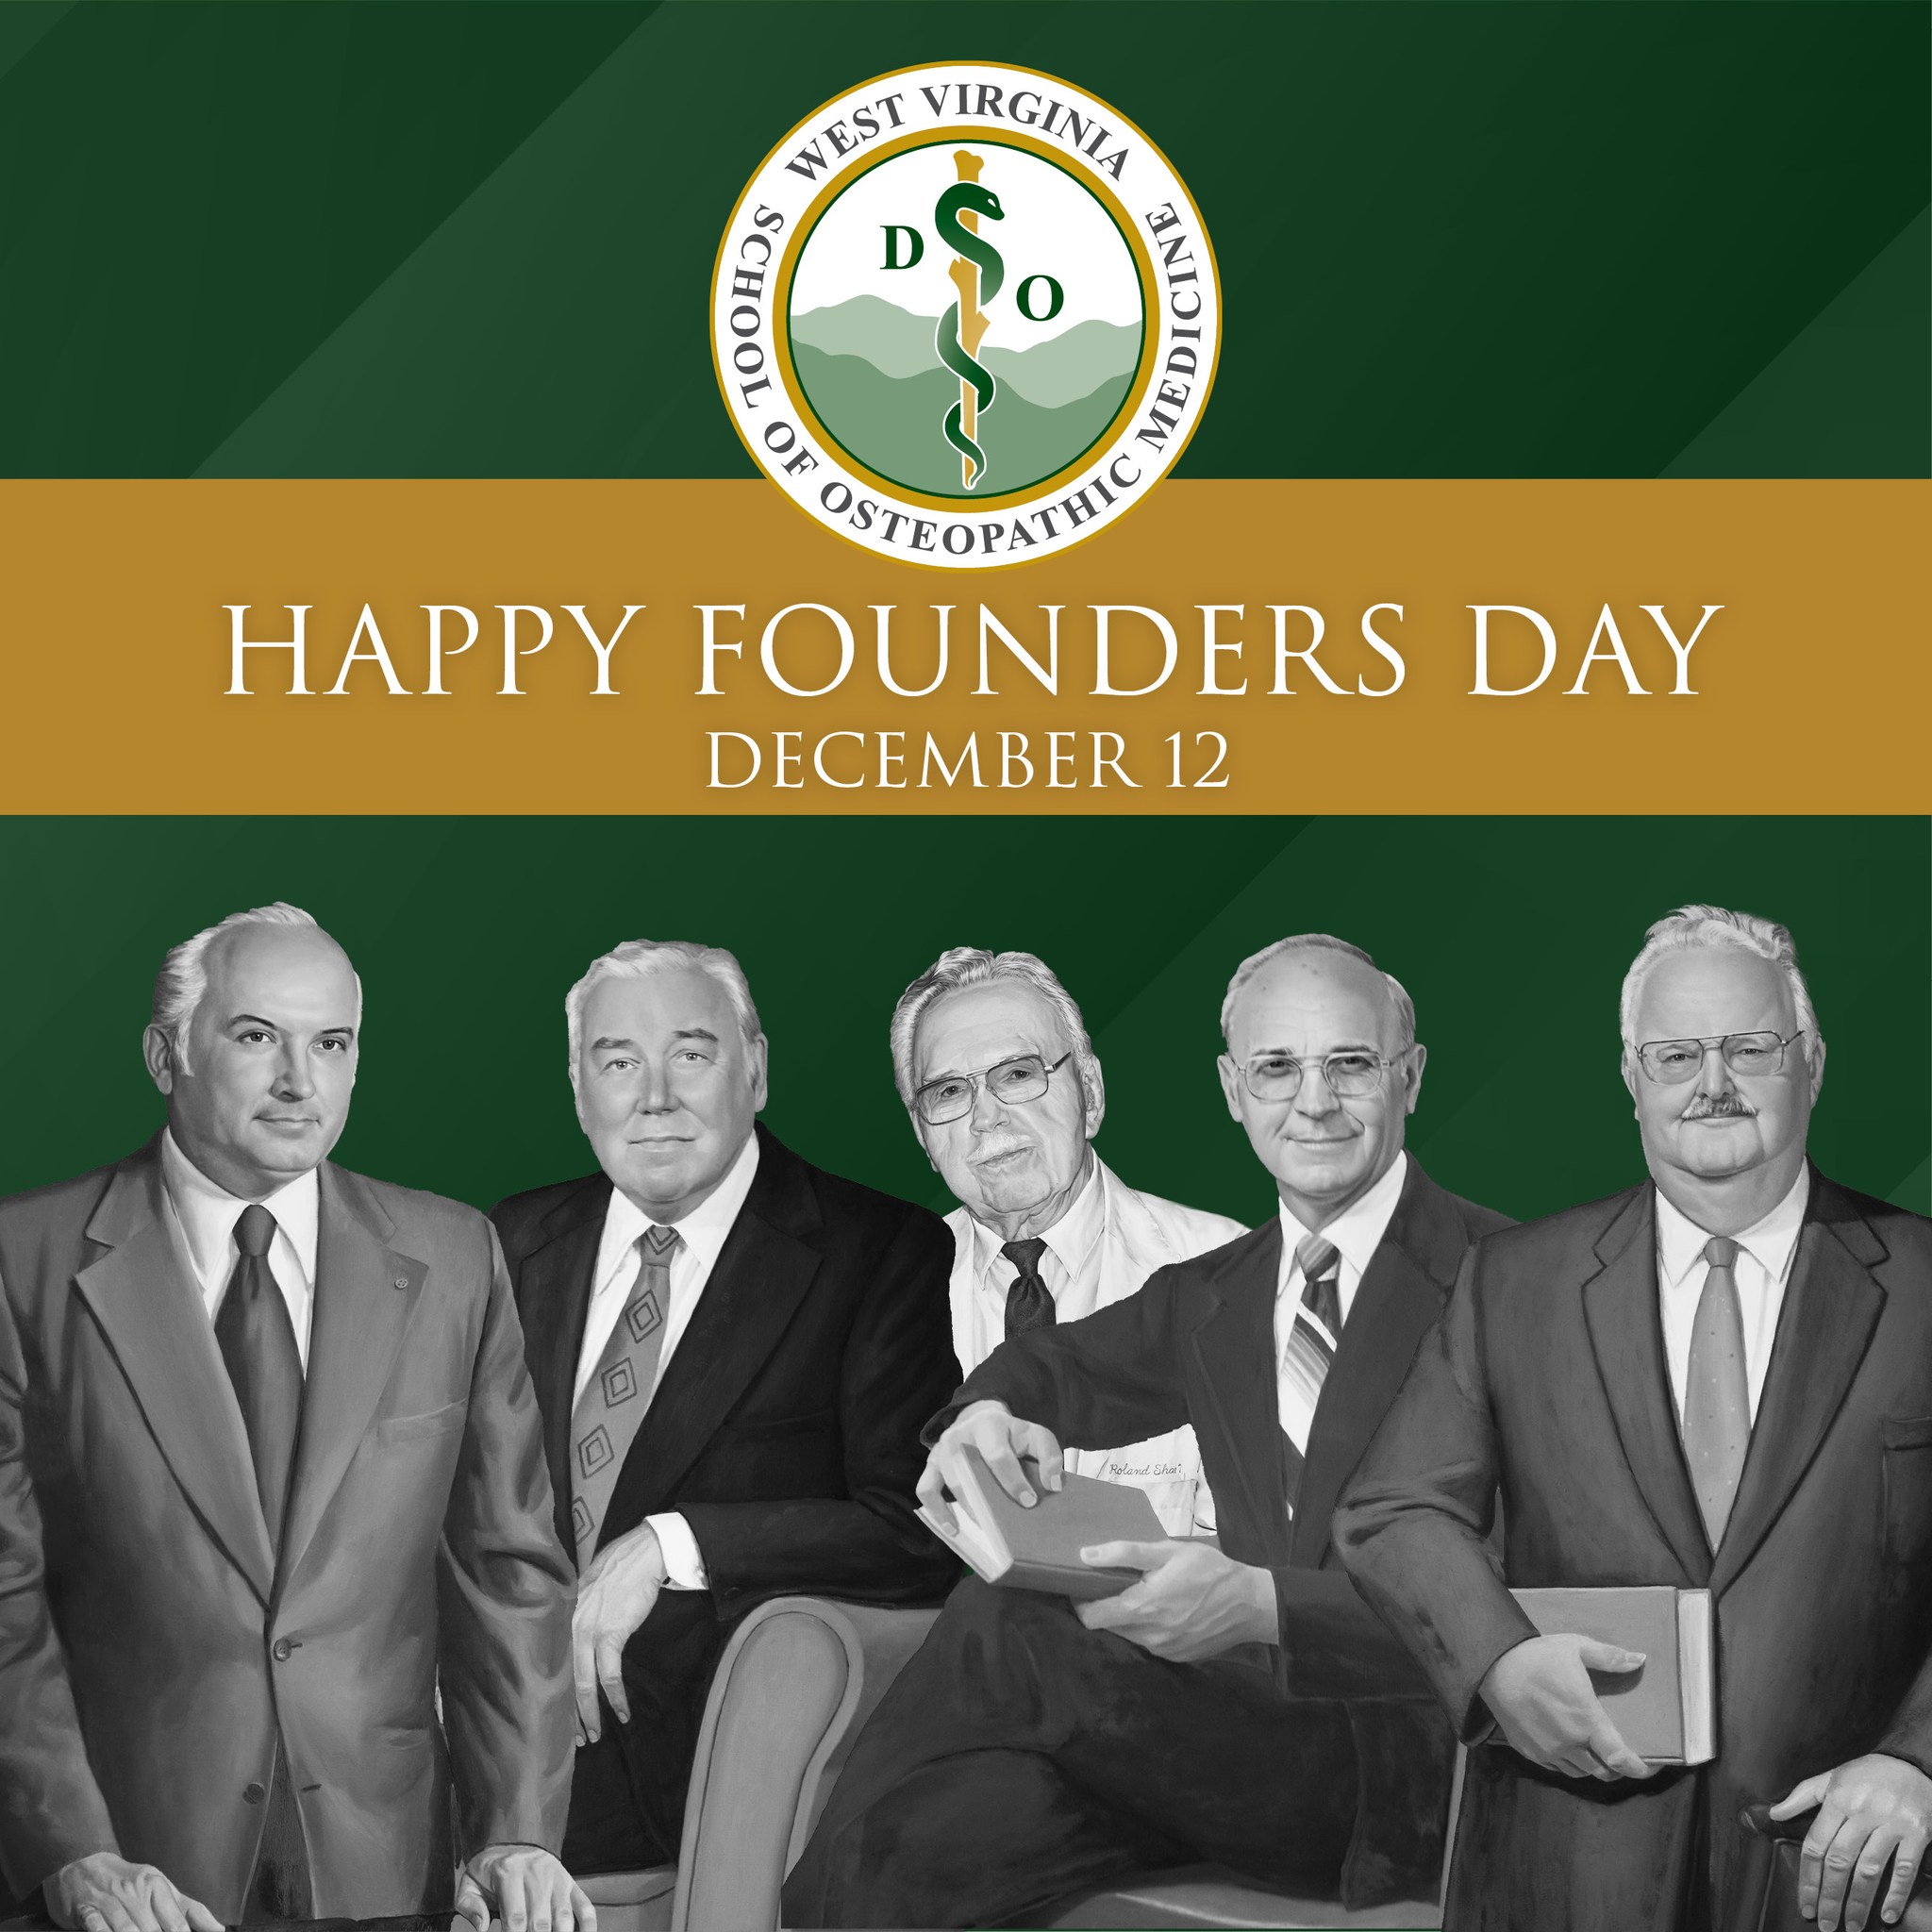 Graphic with message "Happy Founders Day, December 12." Displays West Virginia School of Osteopathic Medicine (WVSOM) logo above and portraits of five men who founded WVSOM below.